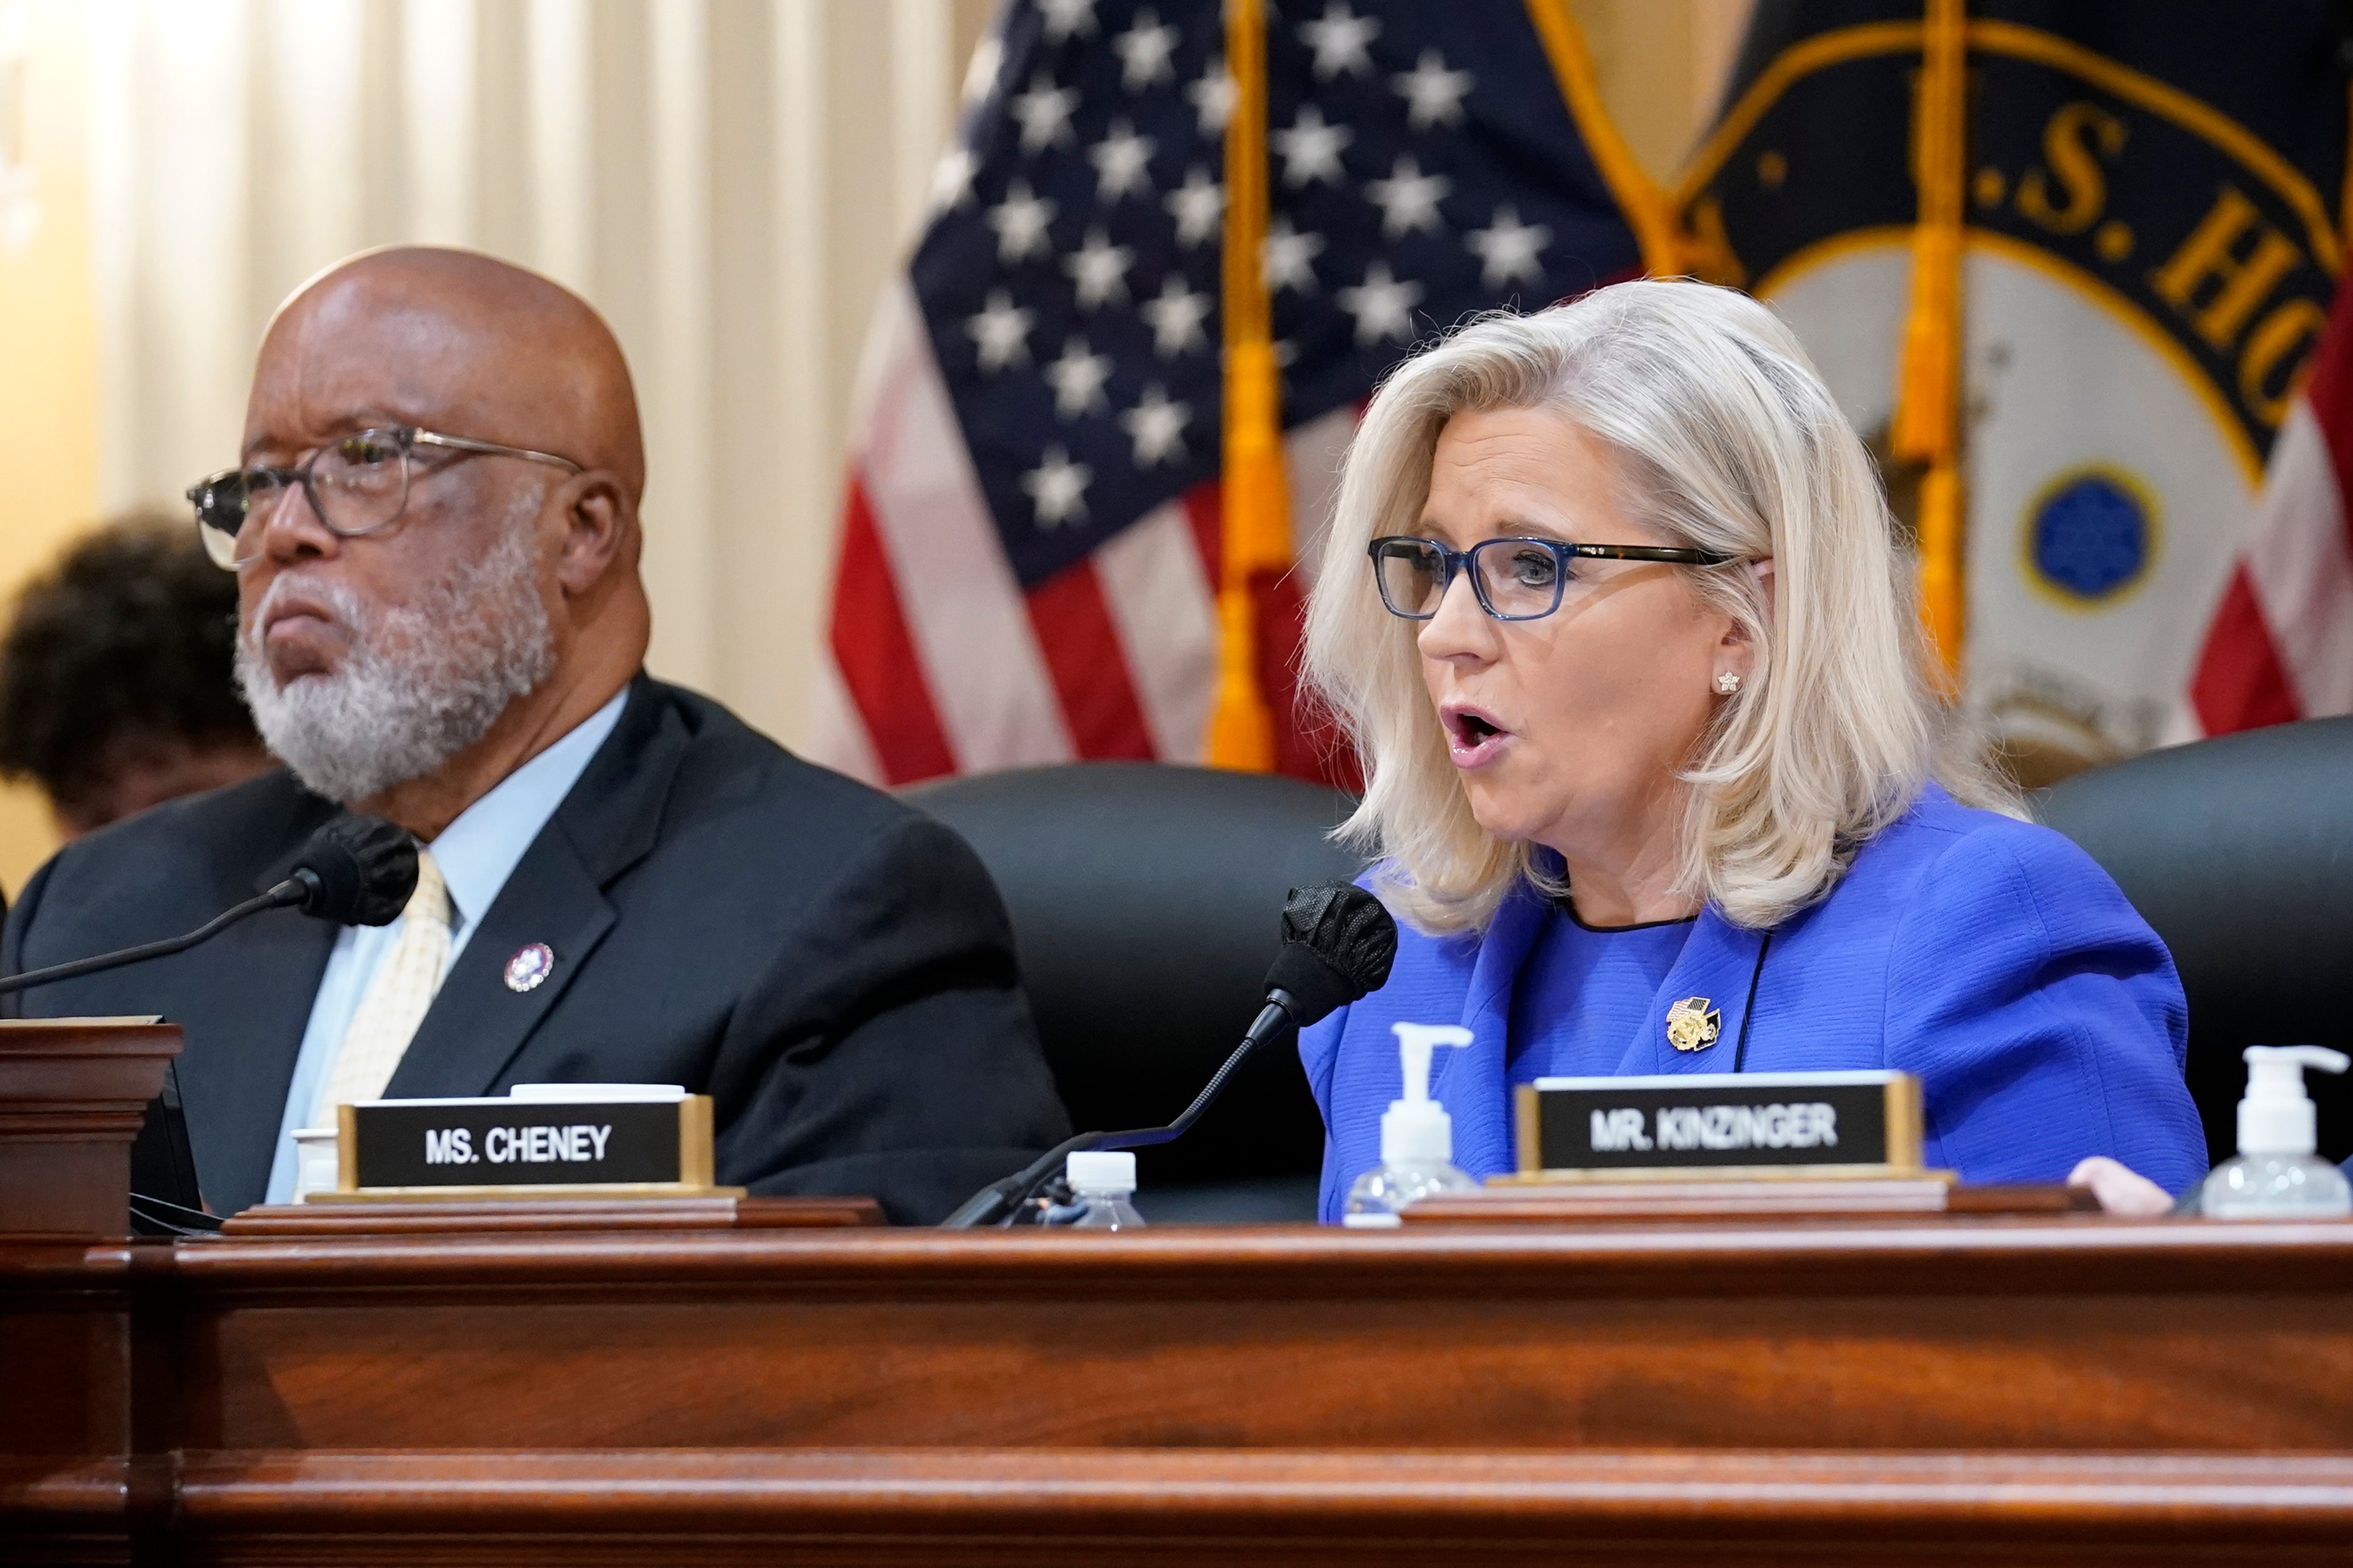 Vice Chair Liz Cheney, R-Wyo., gives her opening remarks as Committee Chairman Rep. Bennie Thompson, D-Miss., left, looks on, as the House select committee investigating the Jan. 6 attack on the U.S. Capitol holds its first public hearing to reveal the findings of a year-long investigation, at the Capitol in Washington, Thursday, June 9, 2022. (AP Photo/J. Scott Applewhite)